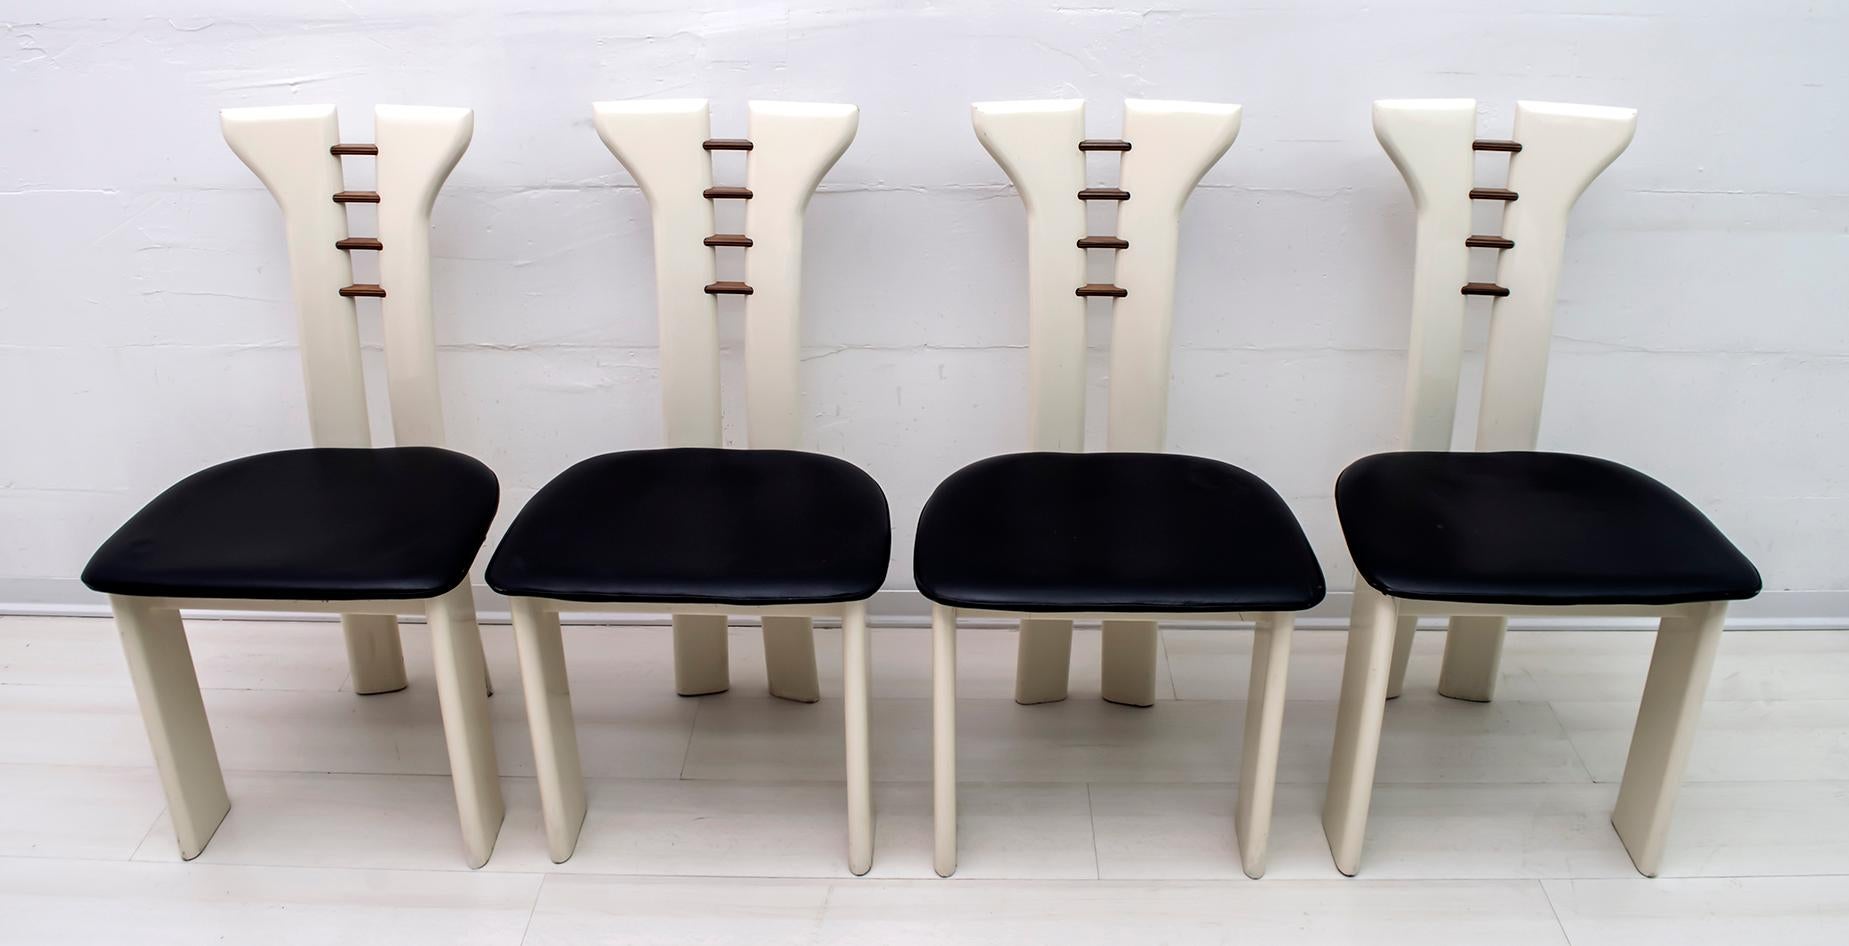 Beautiful set of 4 dining chairs by Pierre Cardin for Roche Bobois. Ivory lacquered solid wood chairs with black leather seats. Captivating wooden details layered on the back. Dark wood, probably rosewood or walnut, layered with maple. The attention